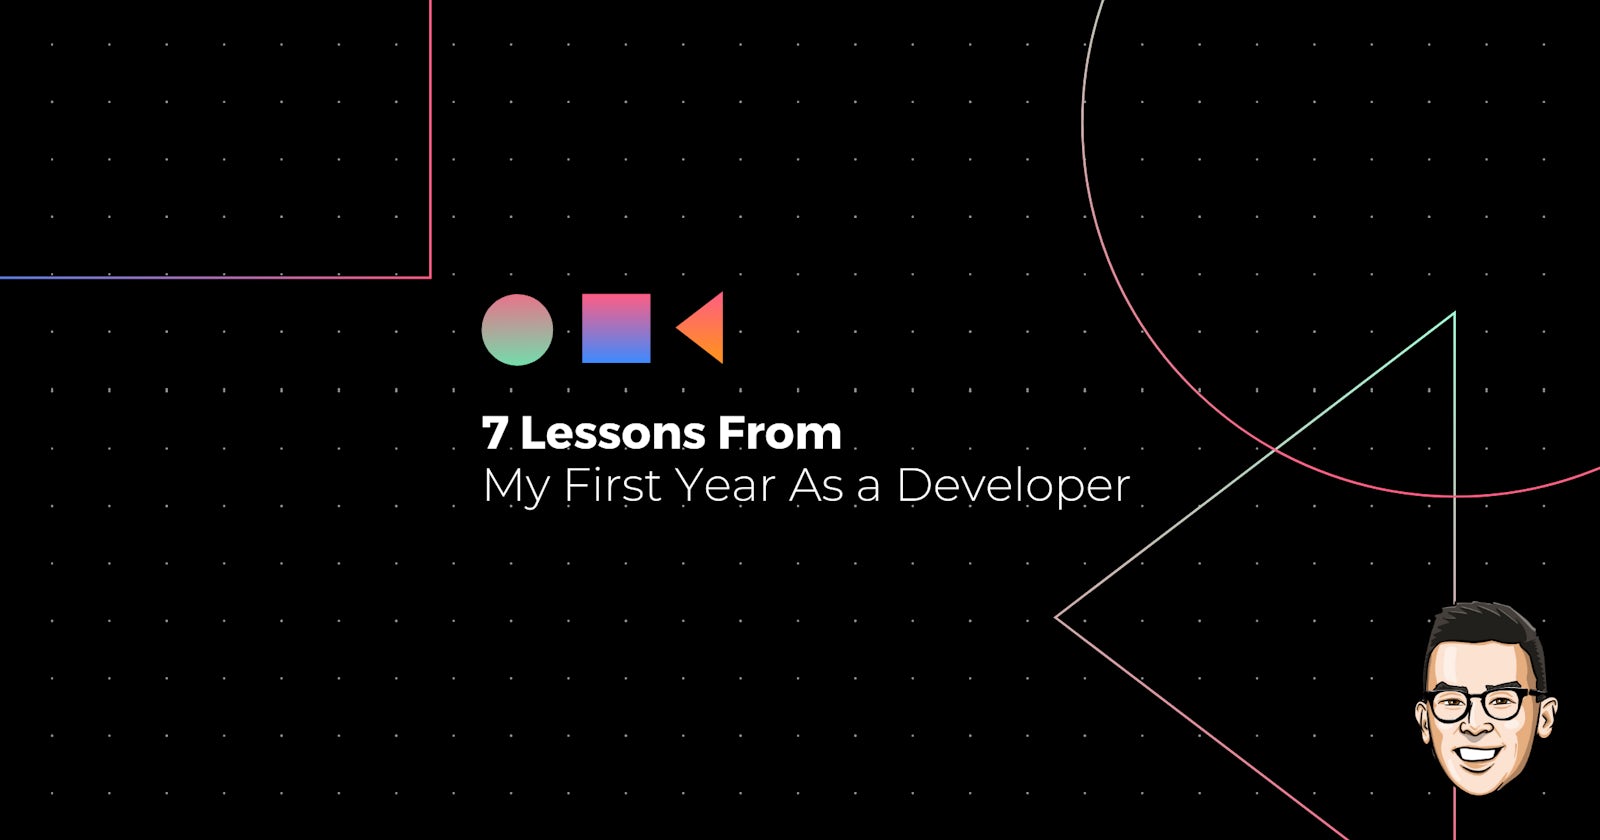 7 Lessons From My First Year As a Developer